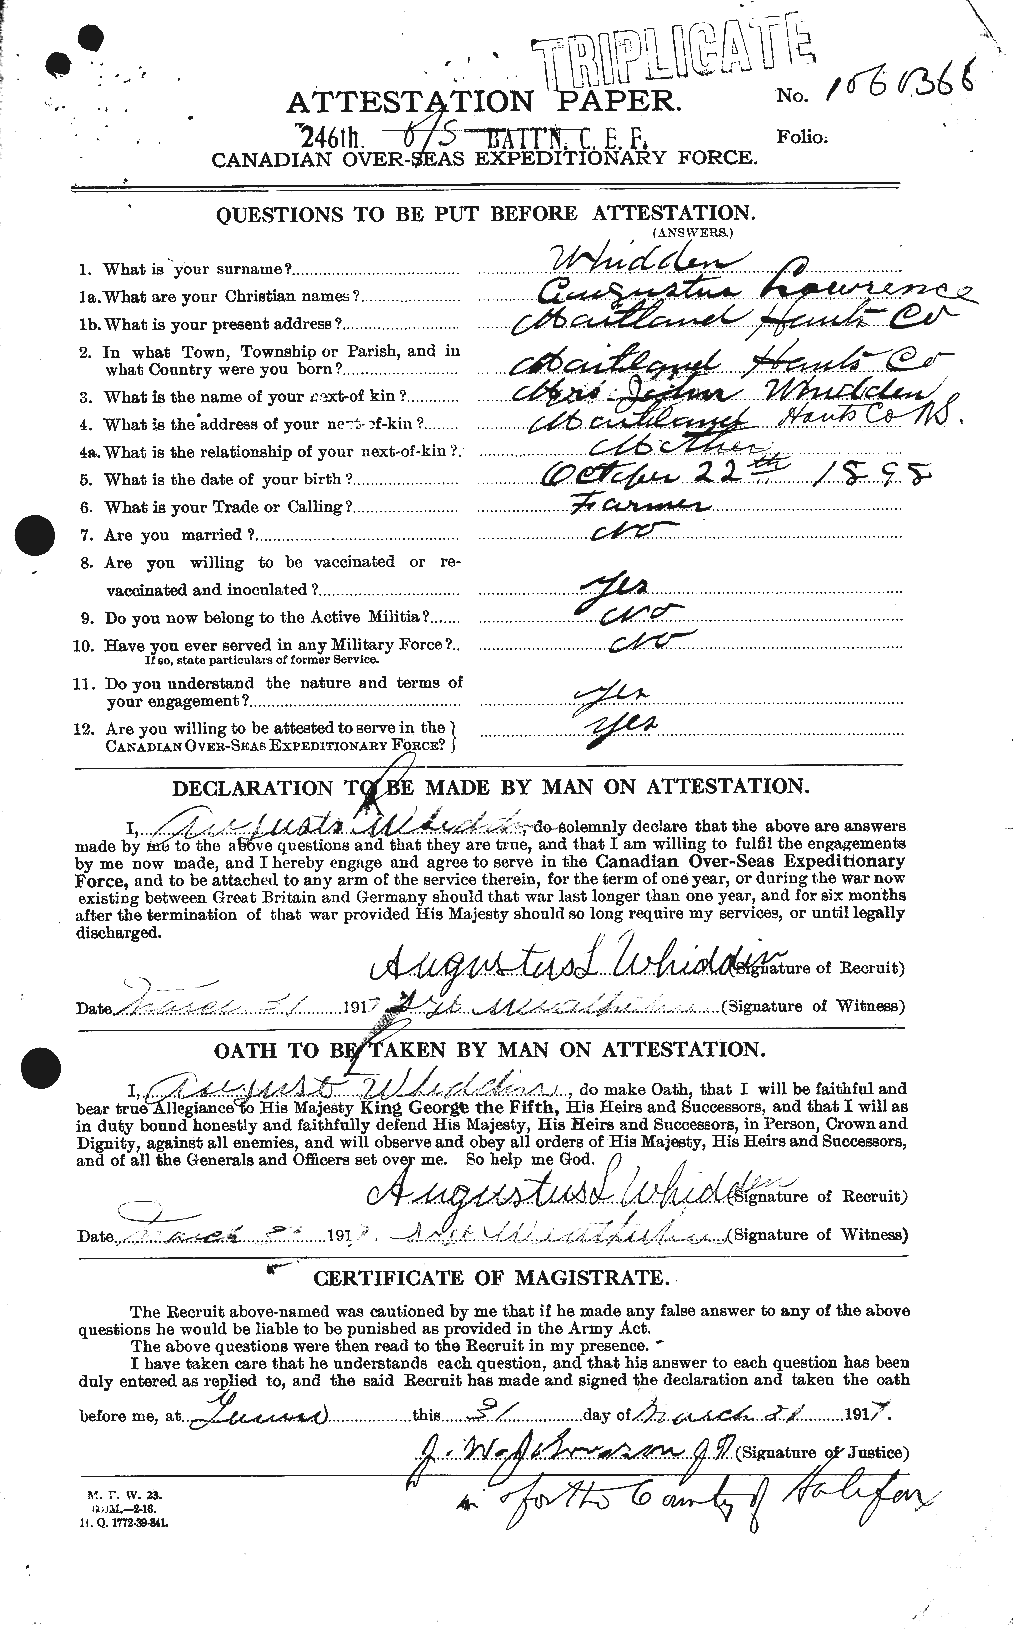 Personnel Records of the First World War - CEF 668656a